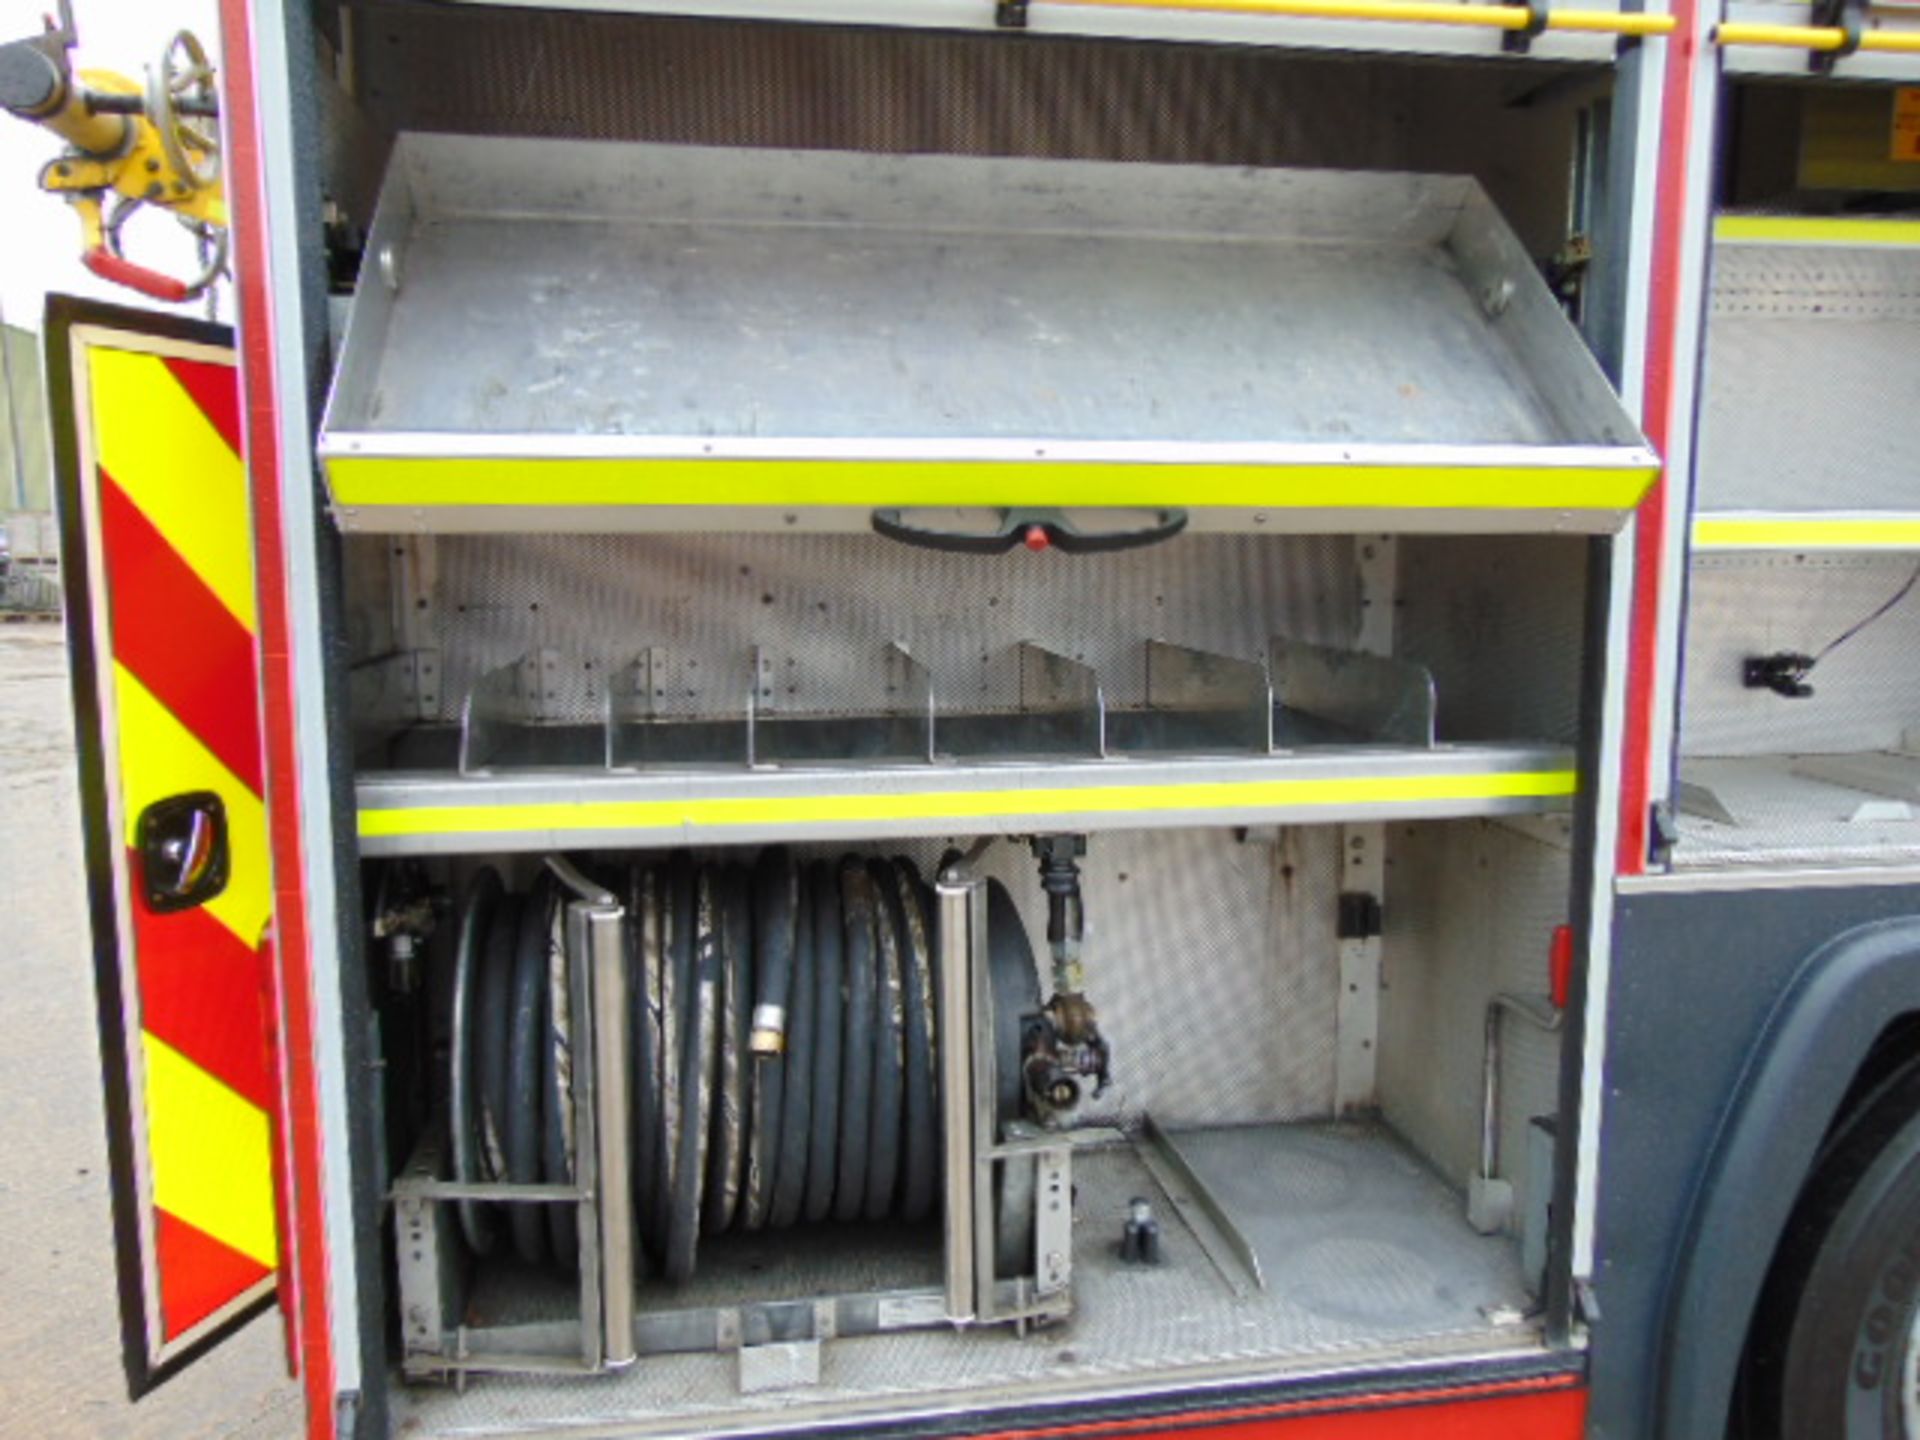 Scania 94D 260 / Emergency One Fire Engine - Image 12 of 33